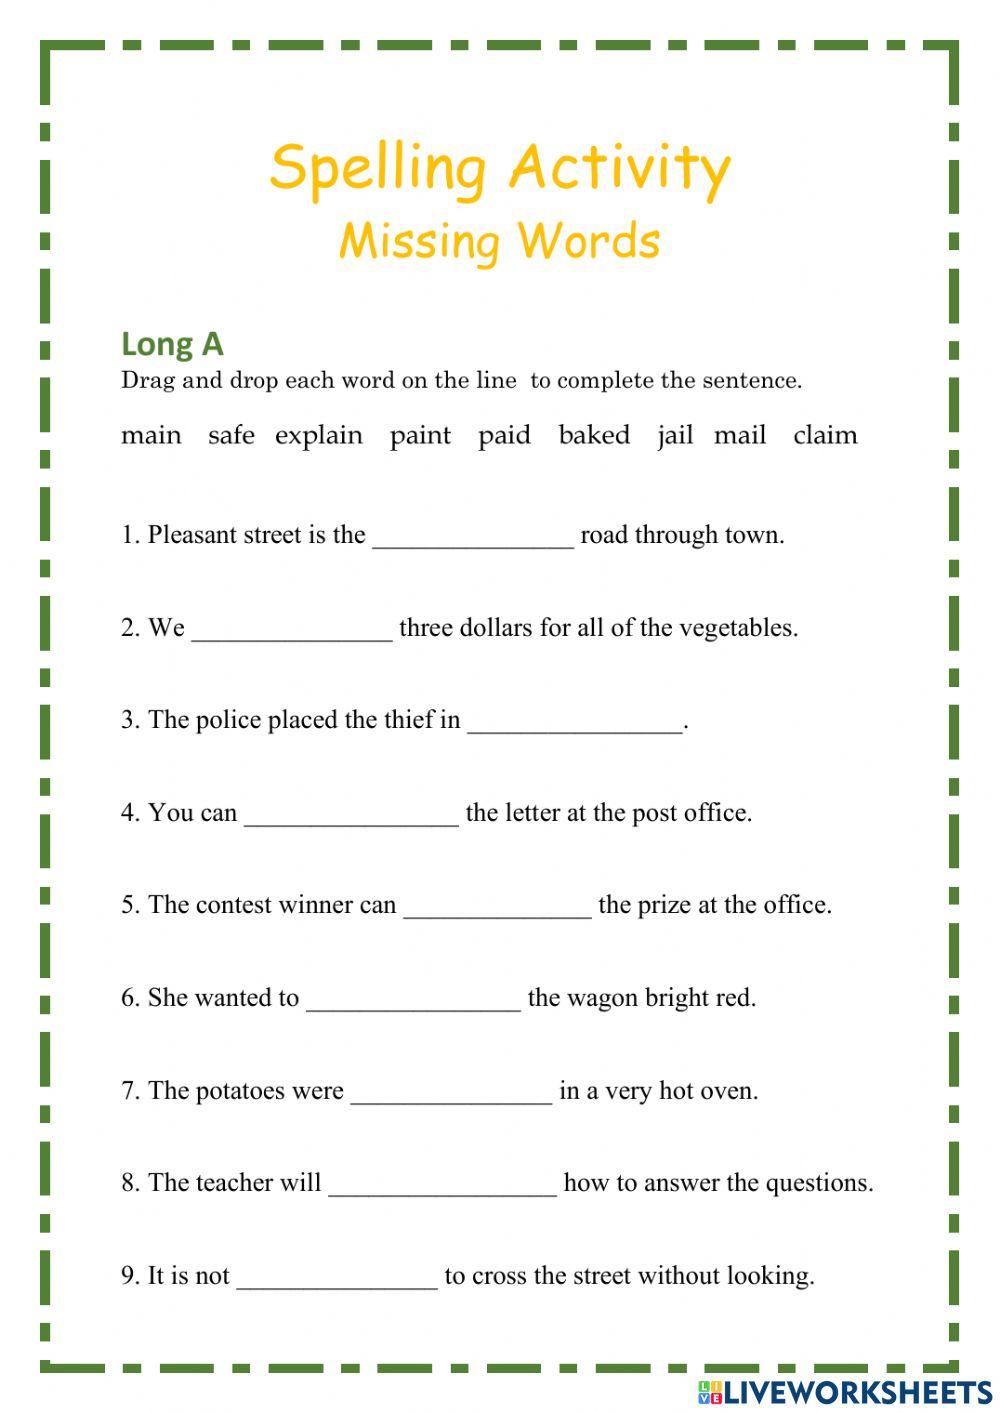 Spelling Activity - LONG A and LONG E